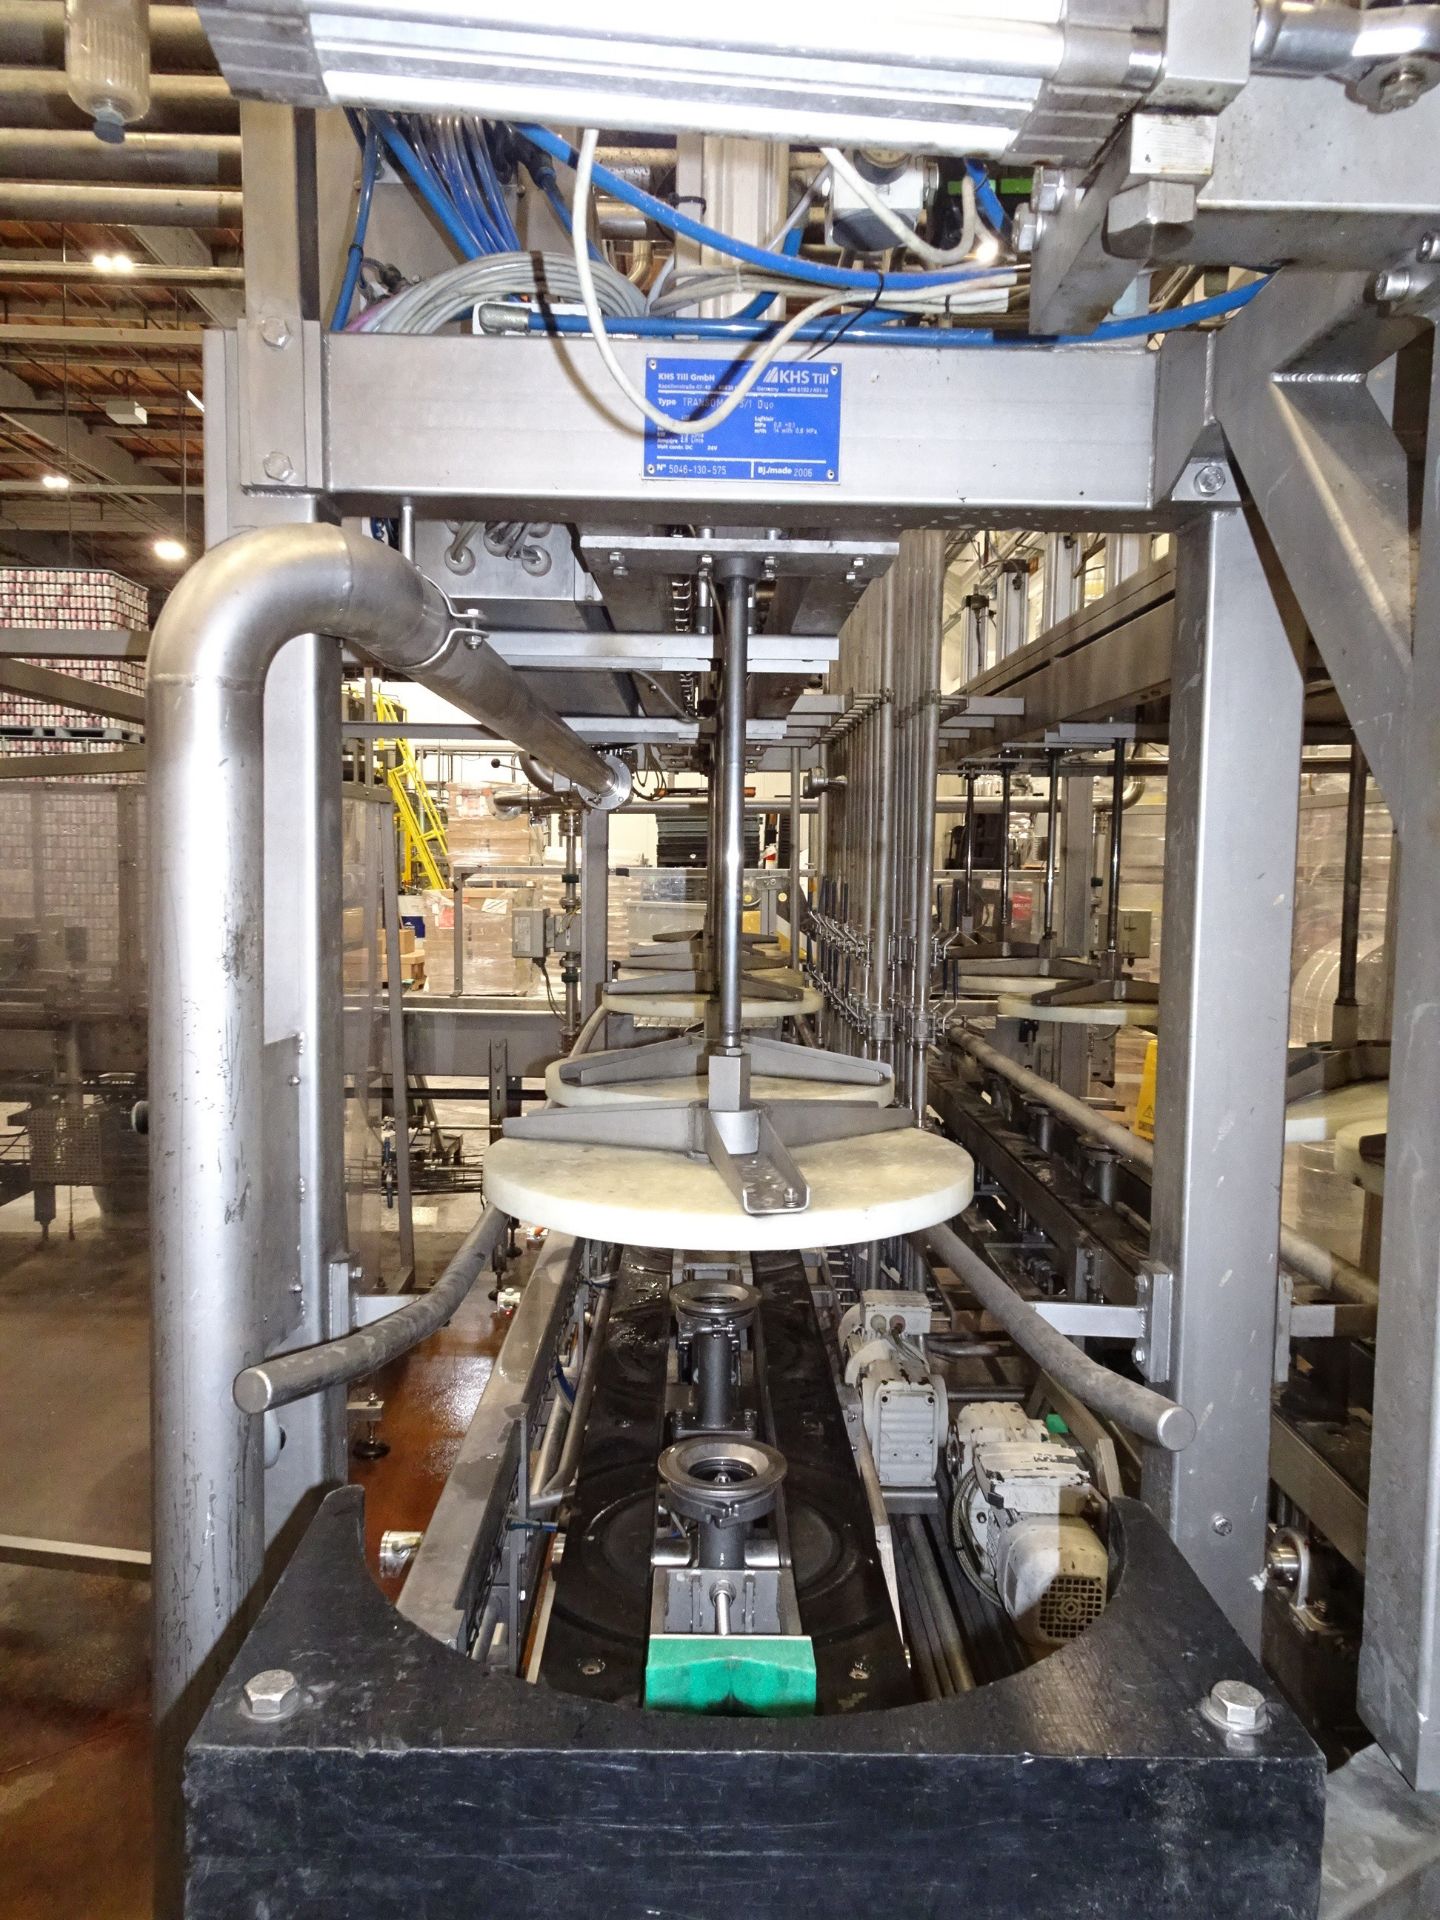 2006 KHS Keg Line For 5 & 15 Gallon Kegs, Complete Twin 8-Station Filling Line Rate - Contact Rigger - Image 27 of 83